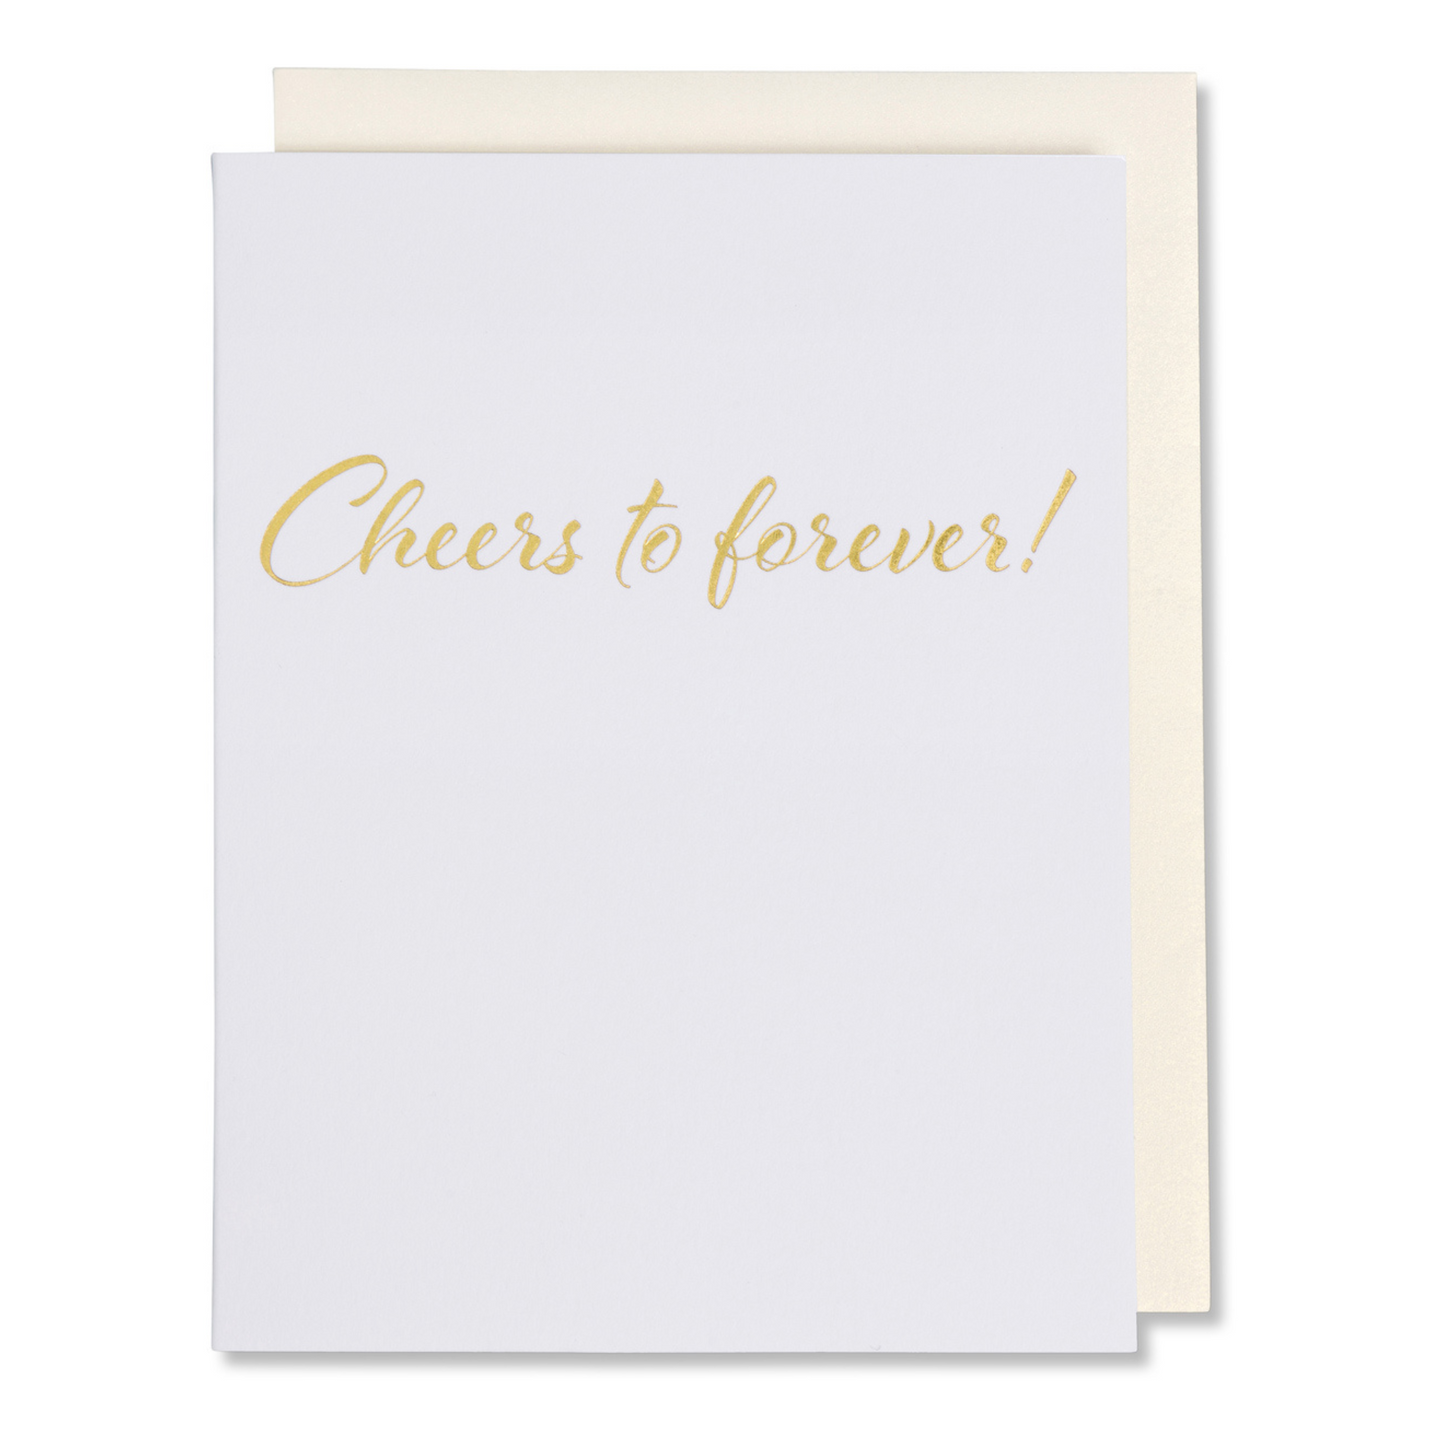 Wedding Card For Bride And Groom, Cheers To Forever, Celebrating Love